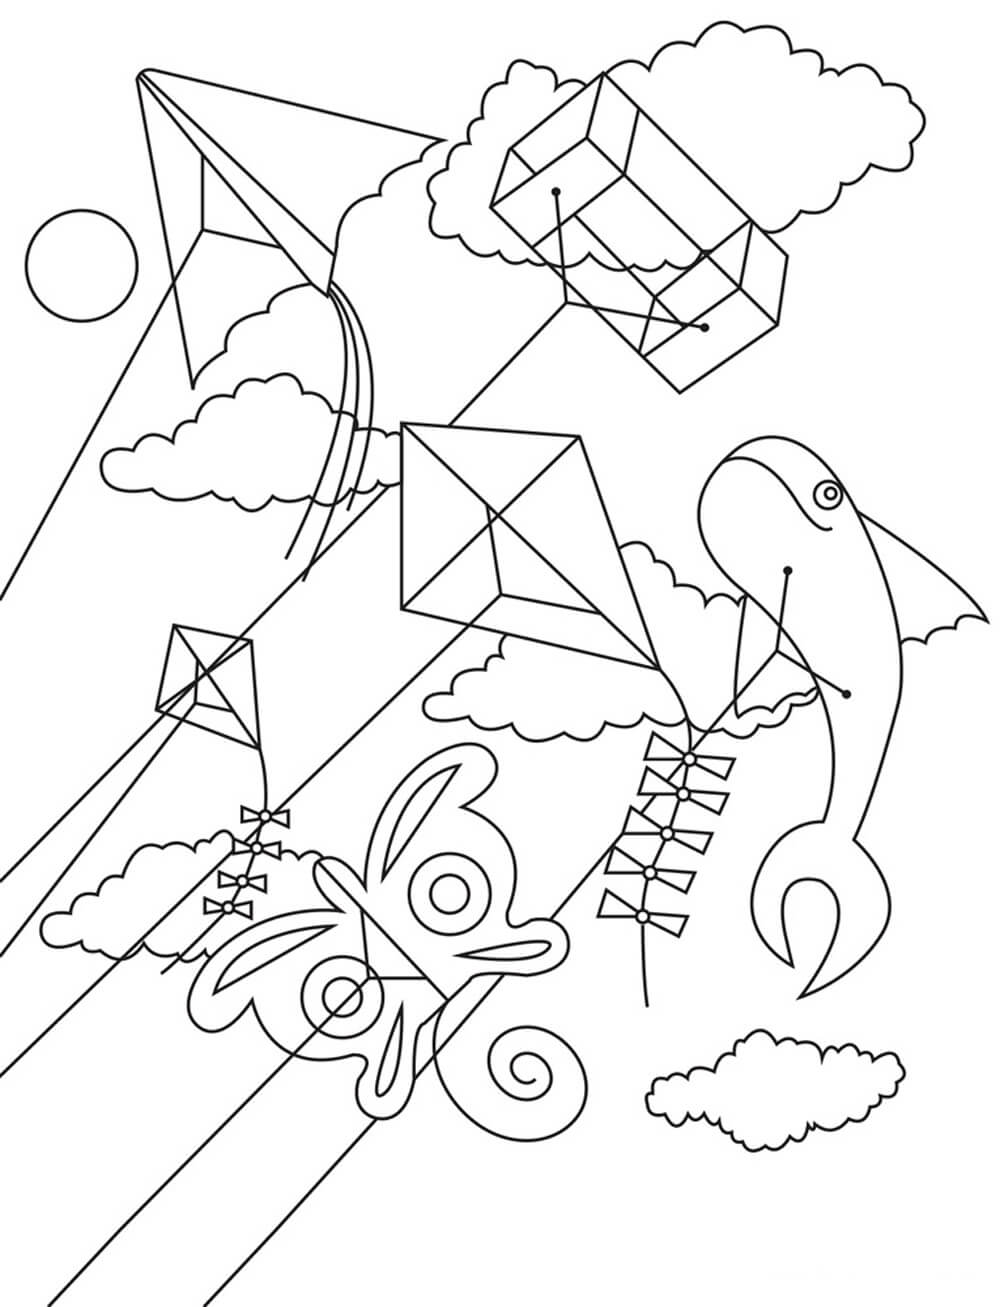 Kite Coloring Pages Free Printable Coloring Pages for Kids